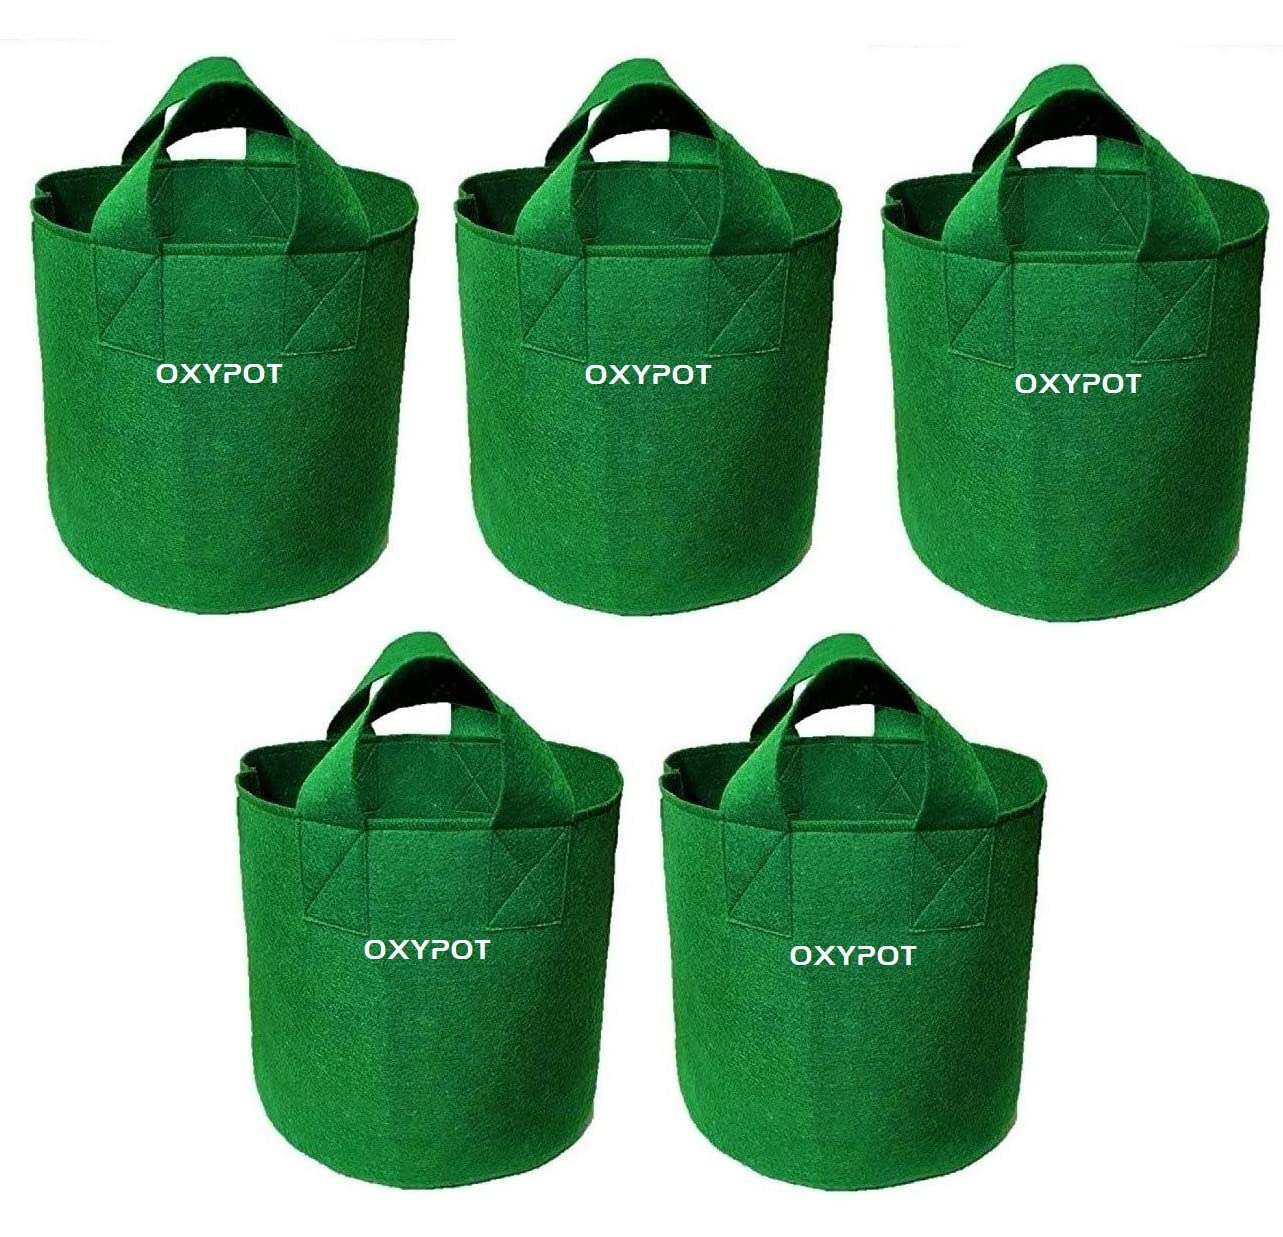 Oxypot 350 GSM Geo Fabric Grow Bags (5 Gallons)- Pack of 5